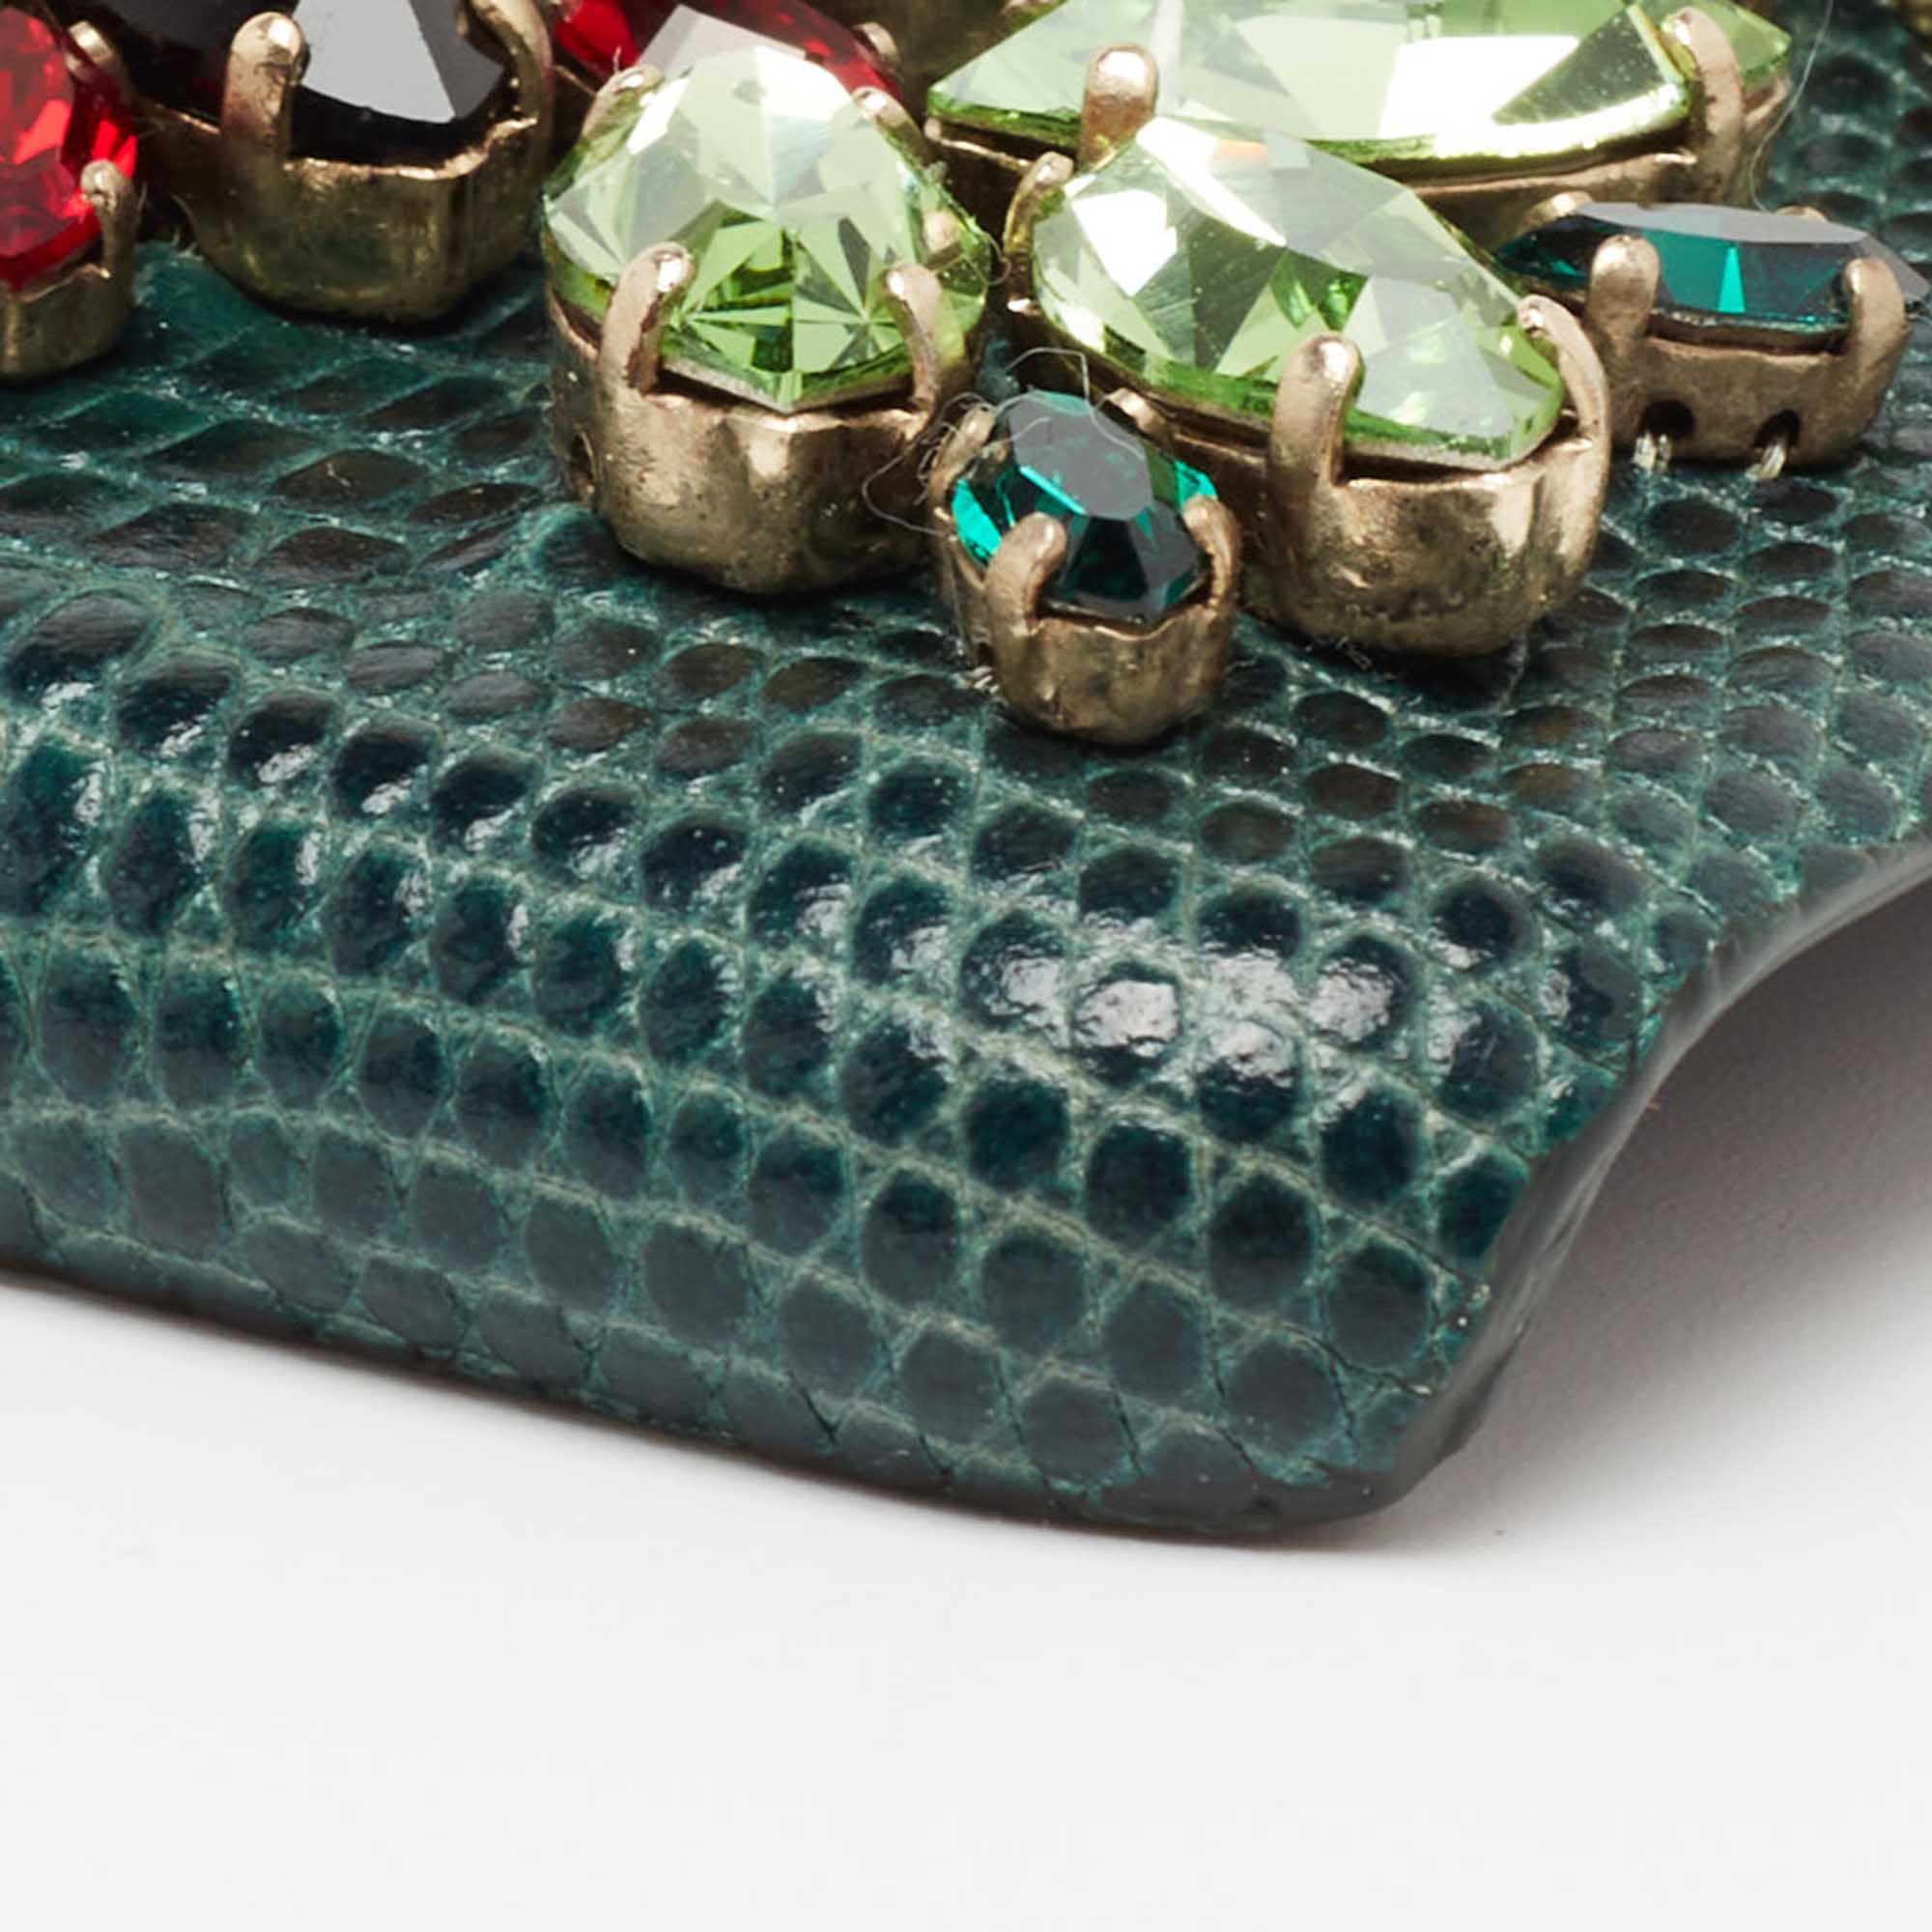 Dolce & Gabbana Green Lizard Embossed Leather Crystal Embellished  IPhone 6 Case